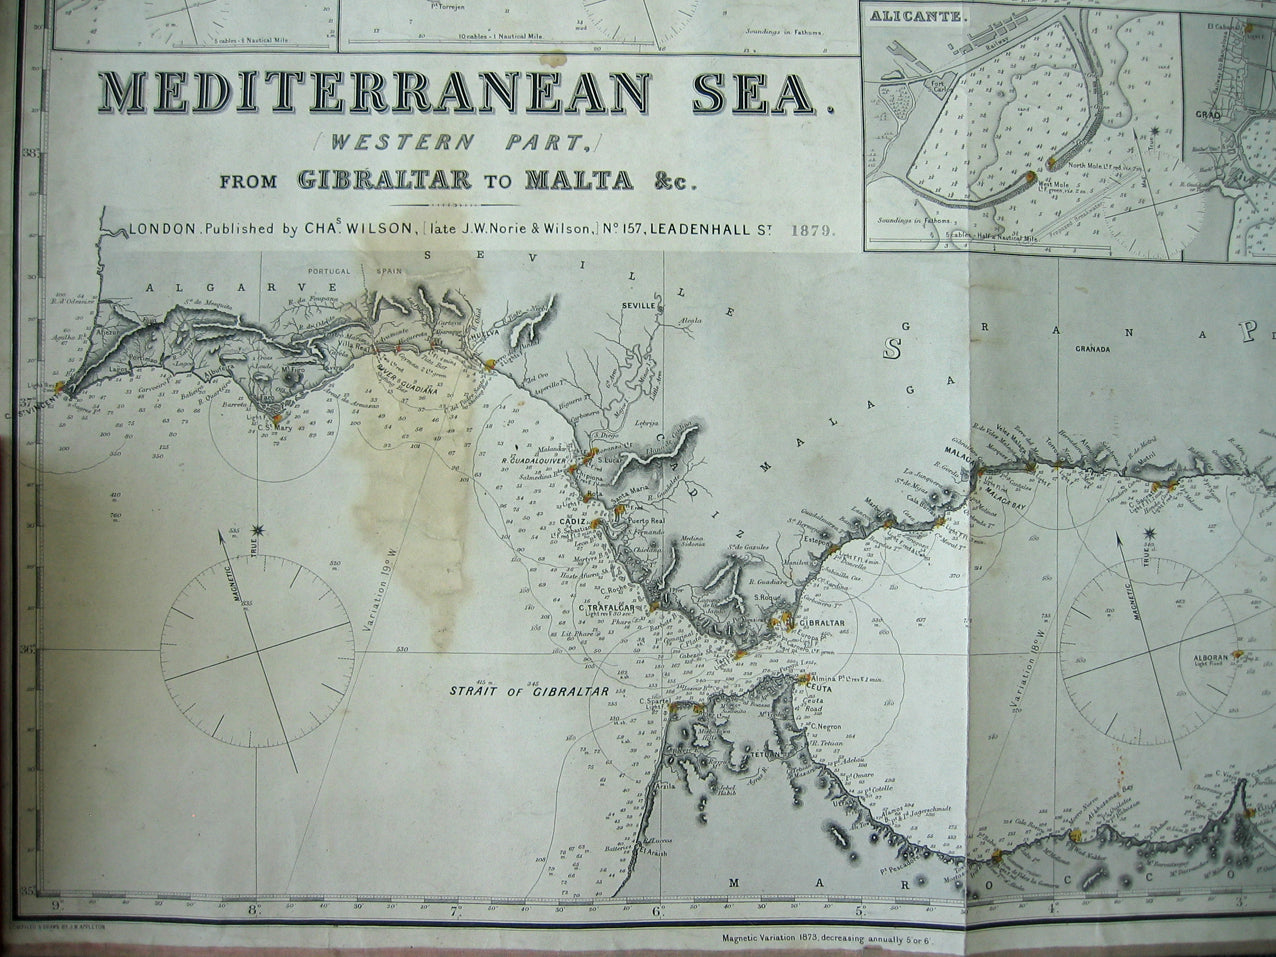 Norie & Wilson: The Western Part of the Mediterranean Sea. From Gibraltar to Malta, 1879 [Blueback sea chart]